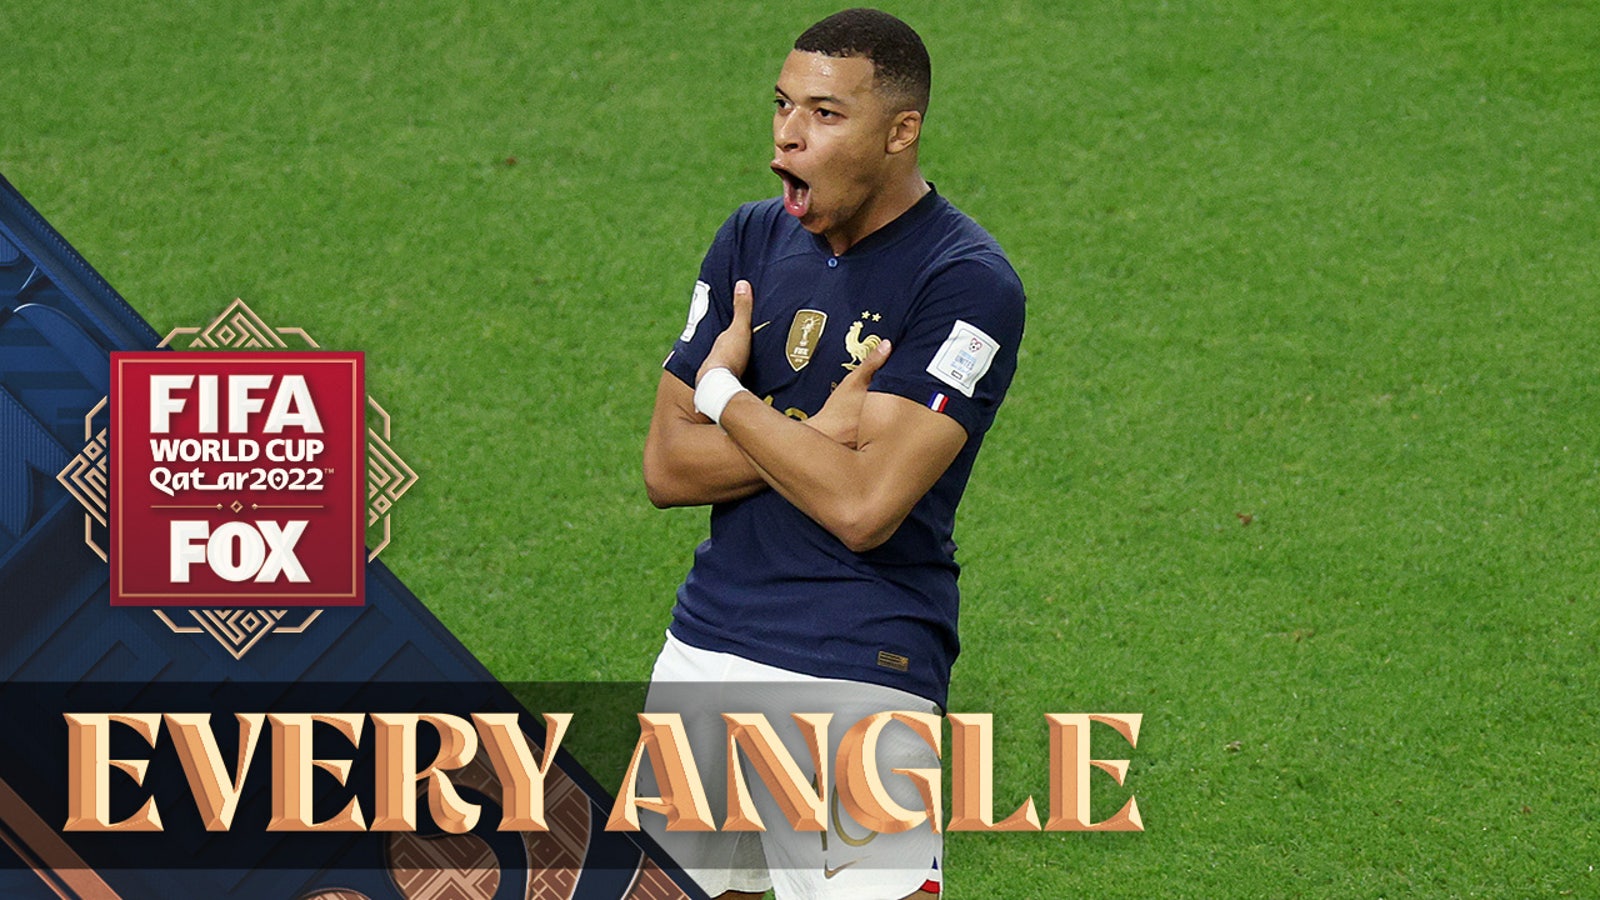 Kylian Mbappé goes SUPER HUMAN for France and scores twice against Poland |  Every corner